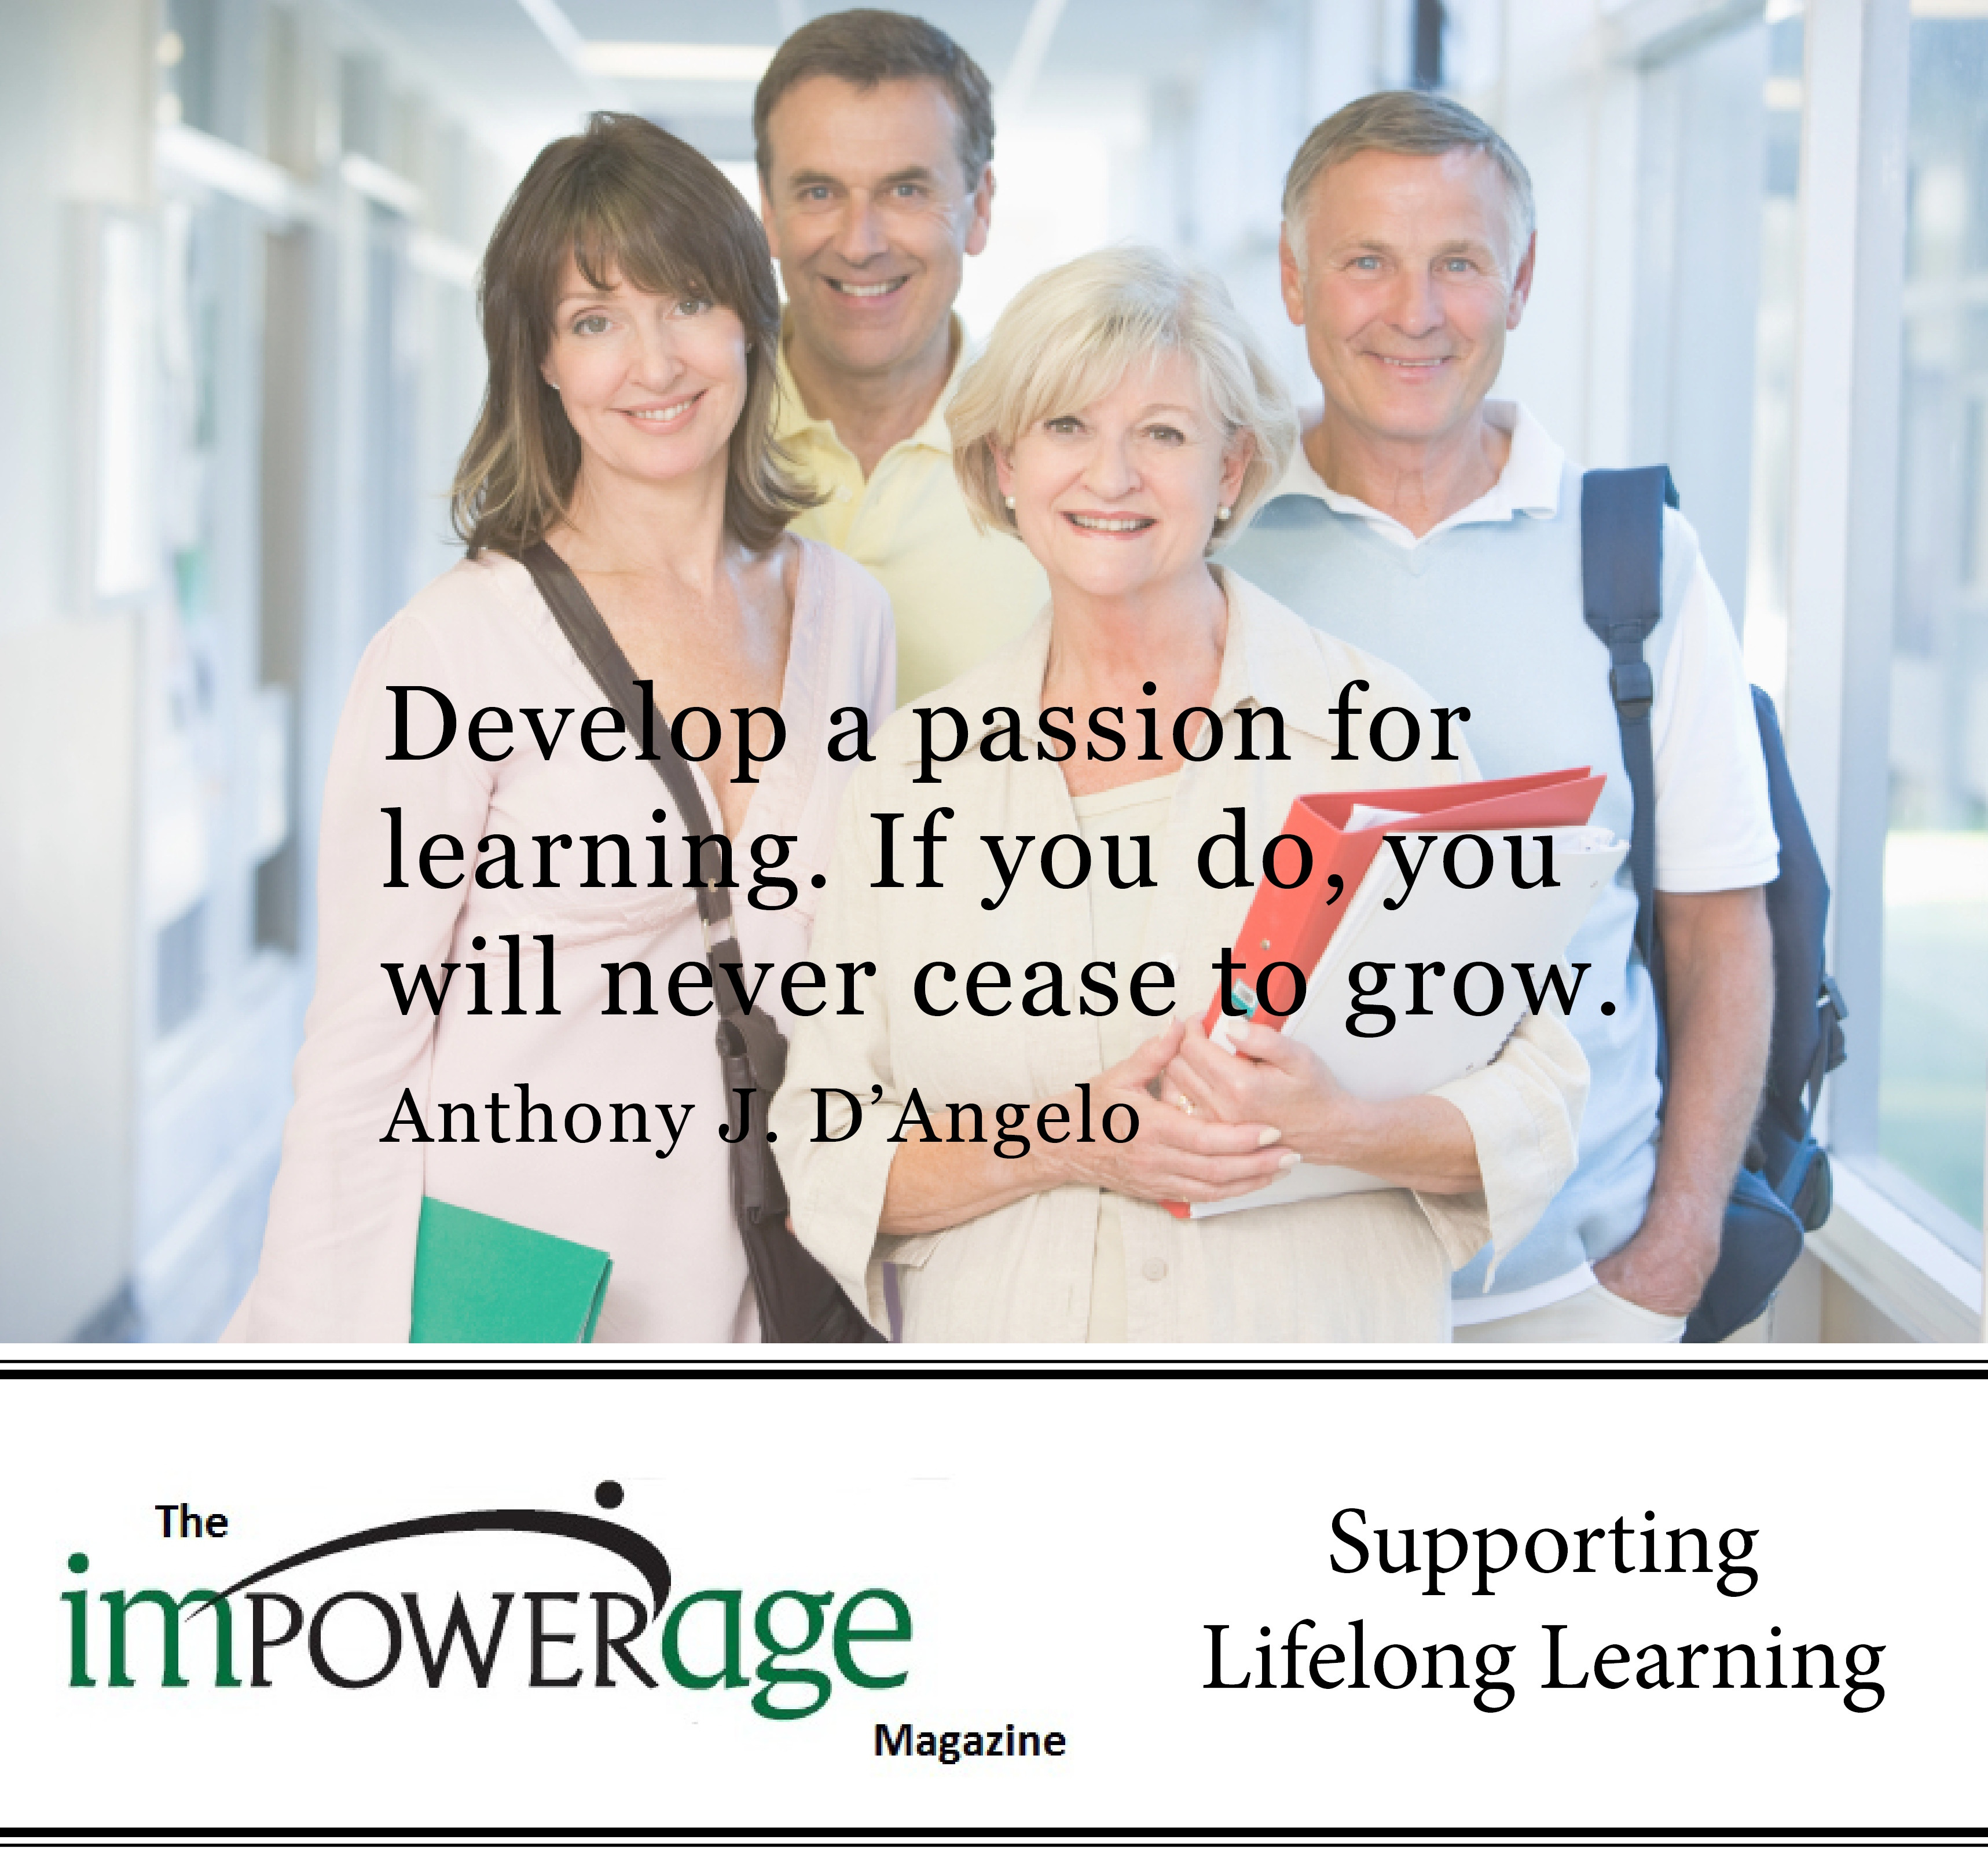 Life Long Learner Quote
 50 Scholarship Lifelong Learning Contest Winners